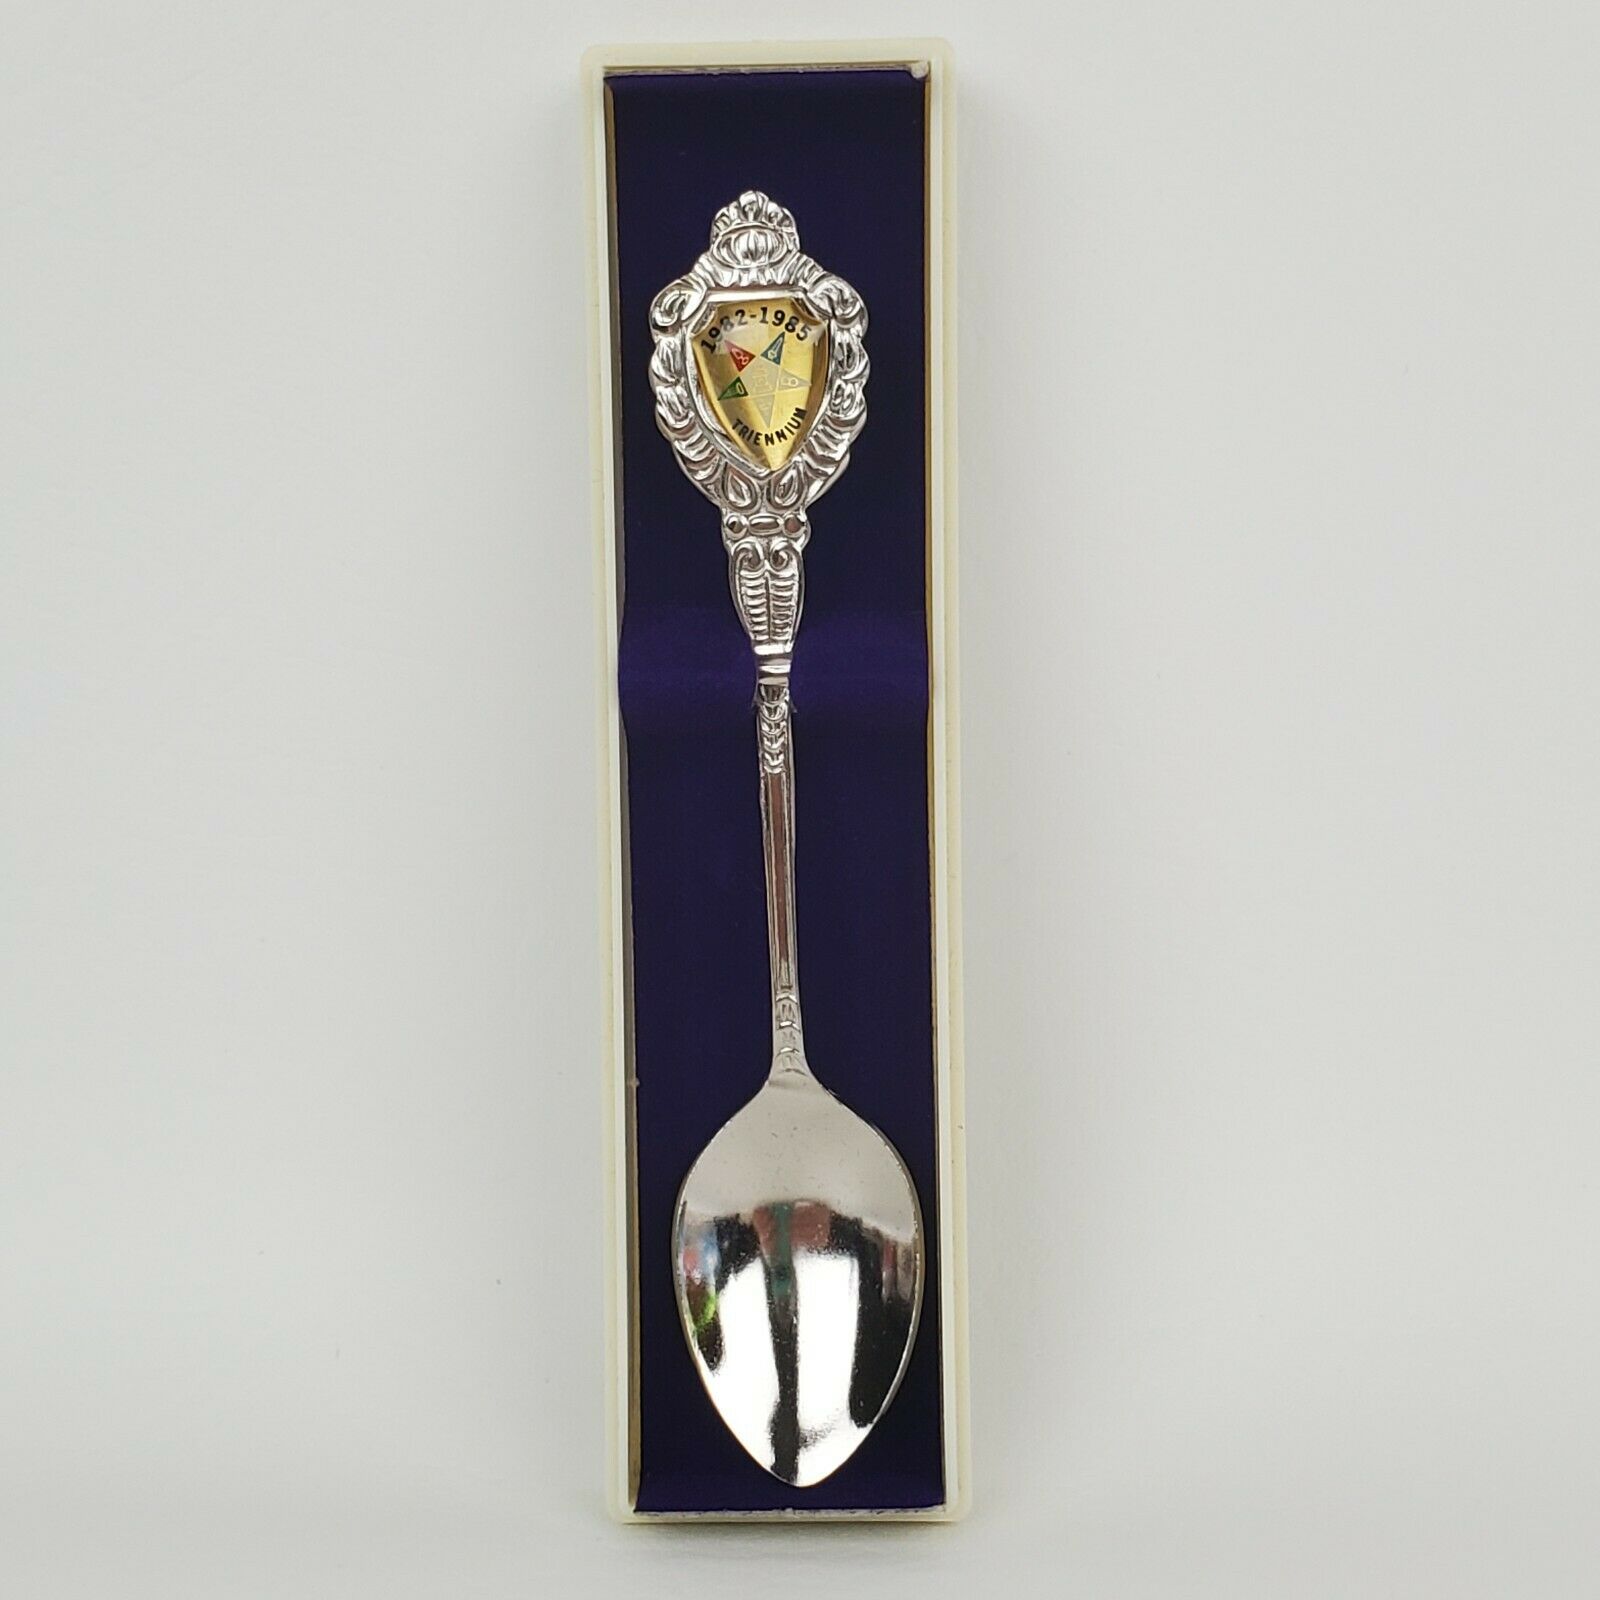 ORDER of the EASTERN STAR Triennial 1982 -1985 Collectible Spoon - 4.25